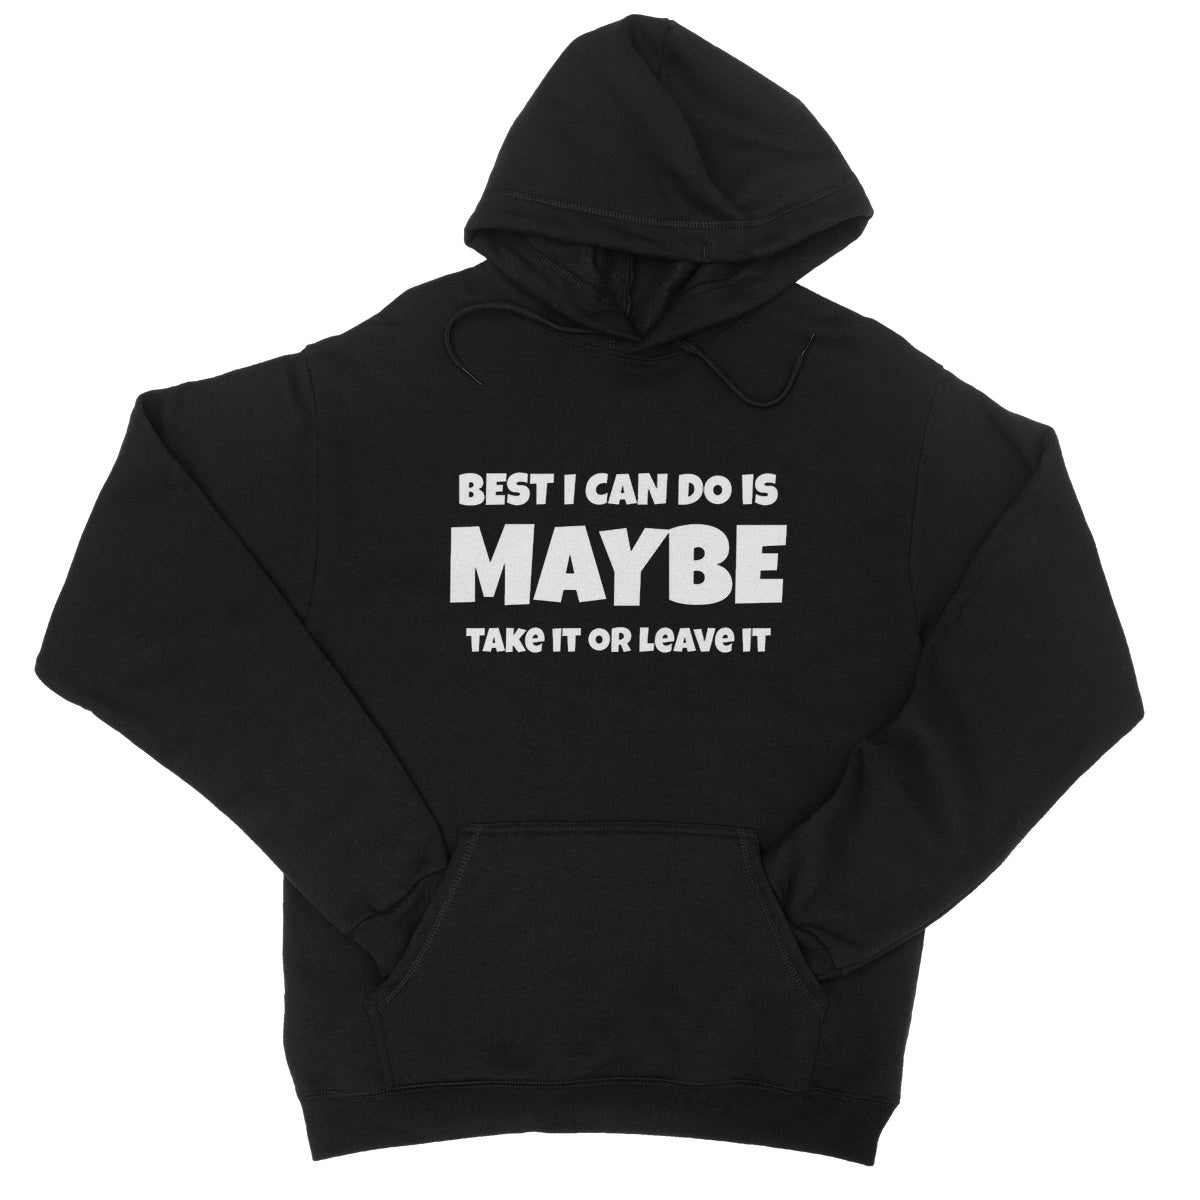 best I can do is maybe hoodie black